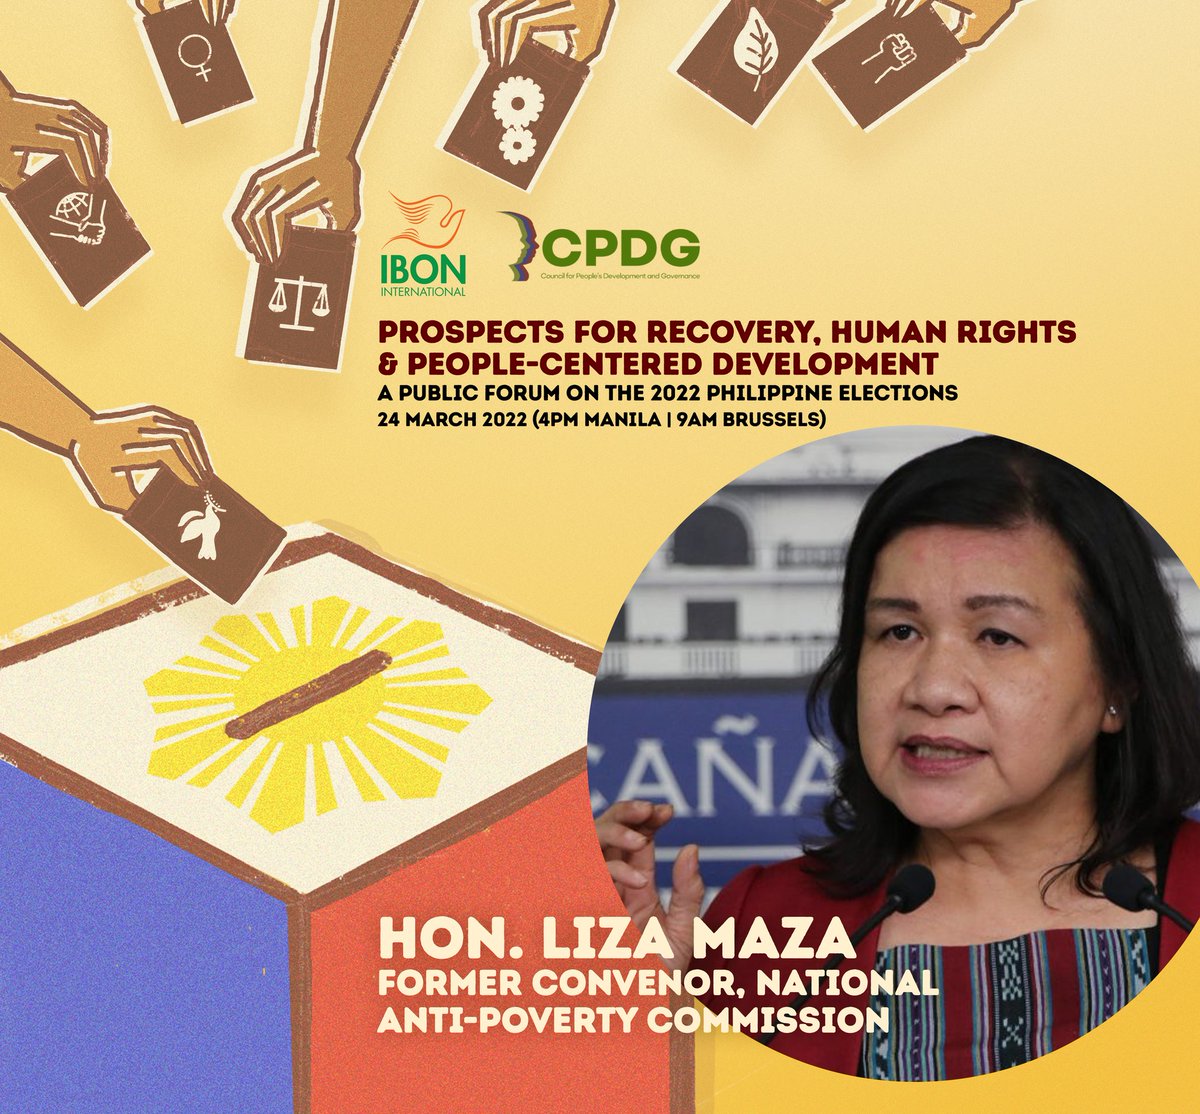 HAPPENING IN AN HOUR!

Register via Zoom: https://t.co/QklQQyO1Sx

MEET THE SPEAKER: The Hon. Liza Maza will join our panel of reactors.

Read more: https://t.co/vckMnv2w6q

#PeoplesDevt #VotePH #Halalan2022 #2022NLE https://t.co/dgboHyQYPk.